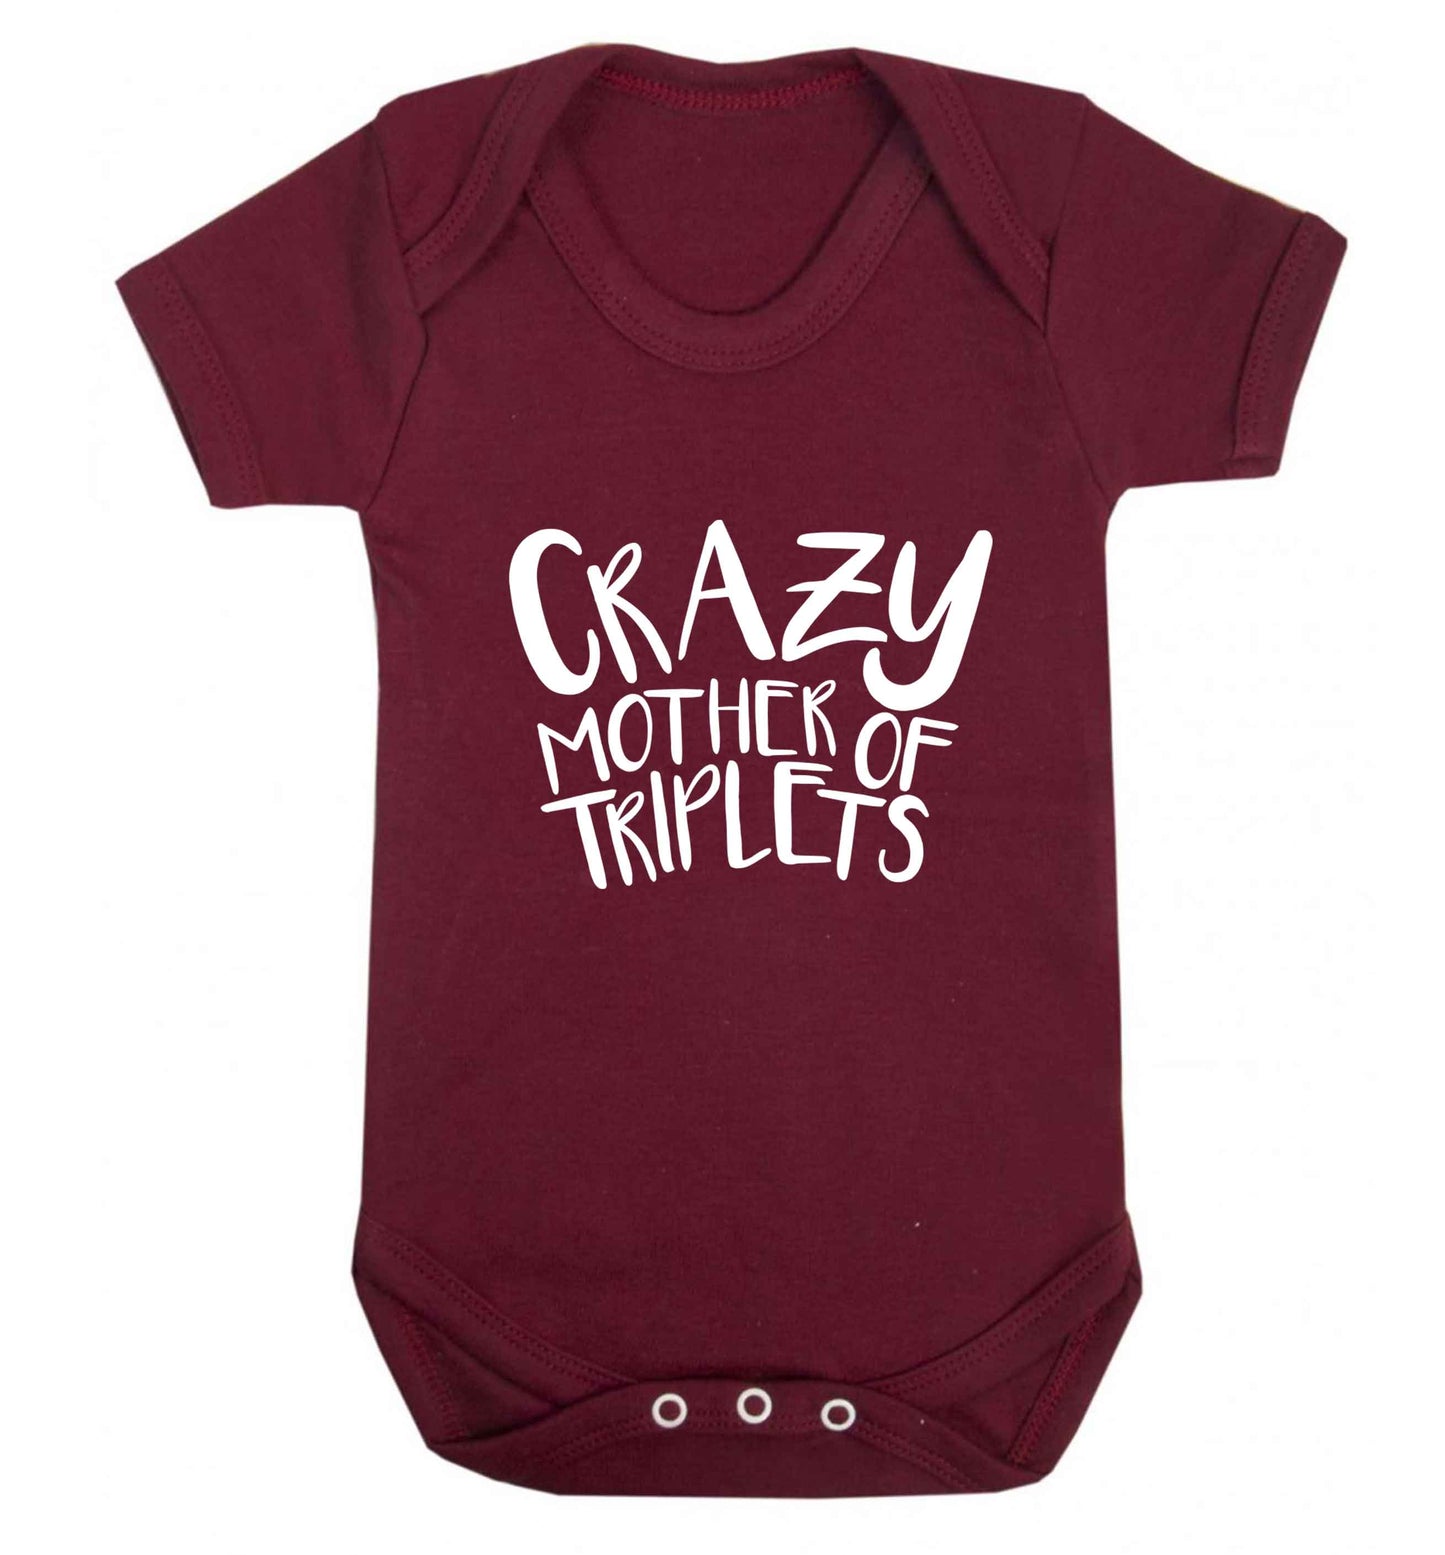 Crazy mother of triplets baby vest maroon 18-24 months